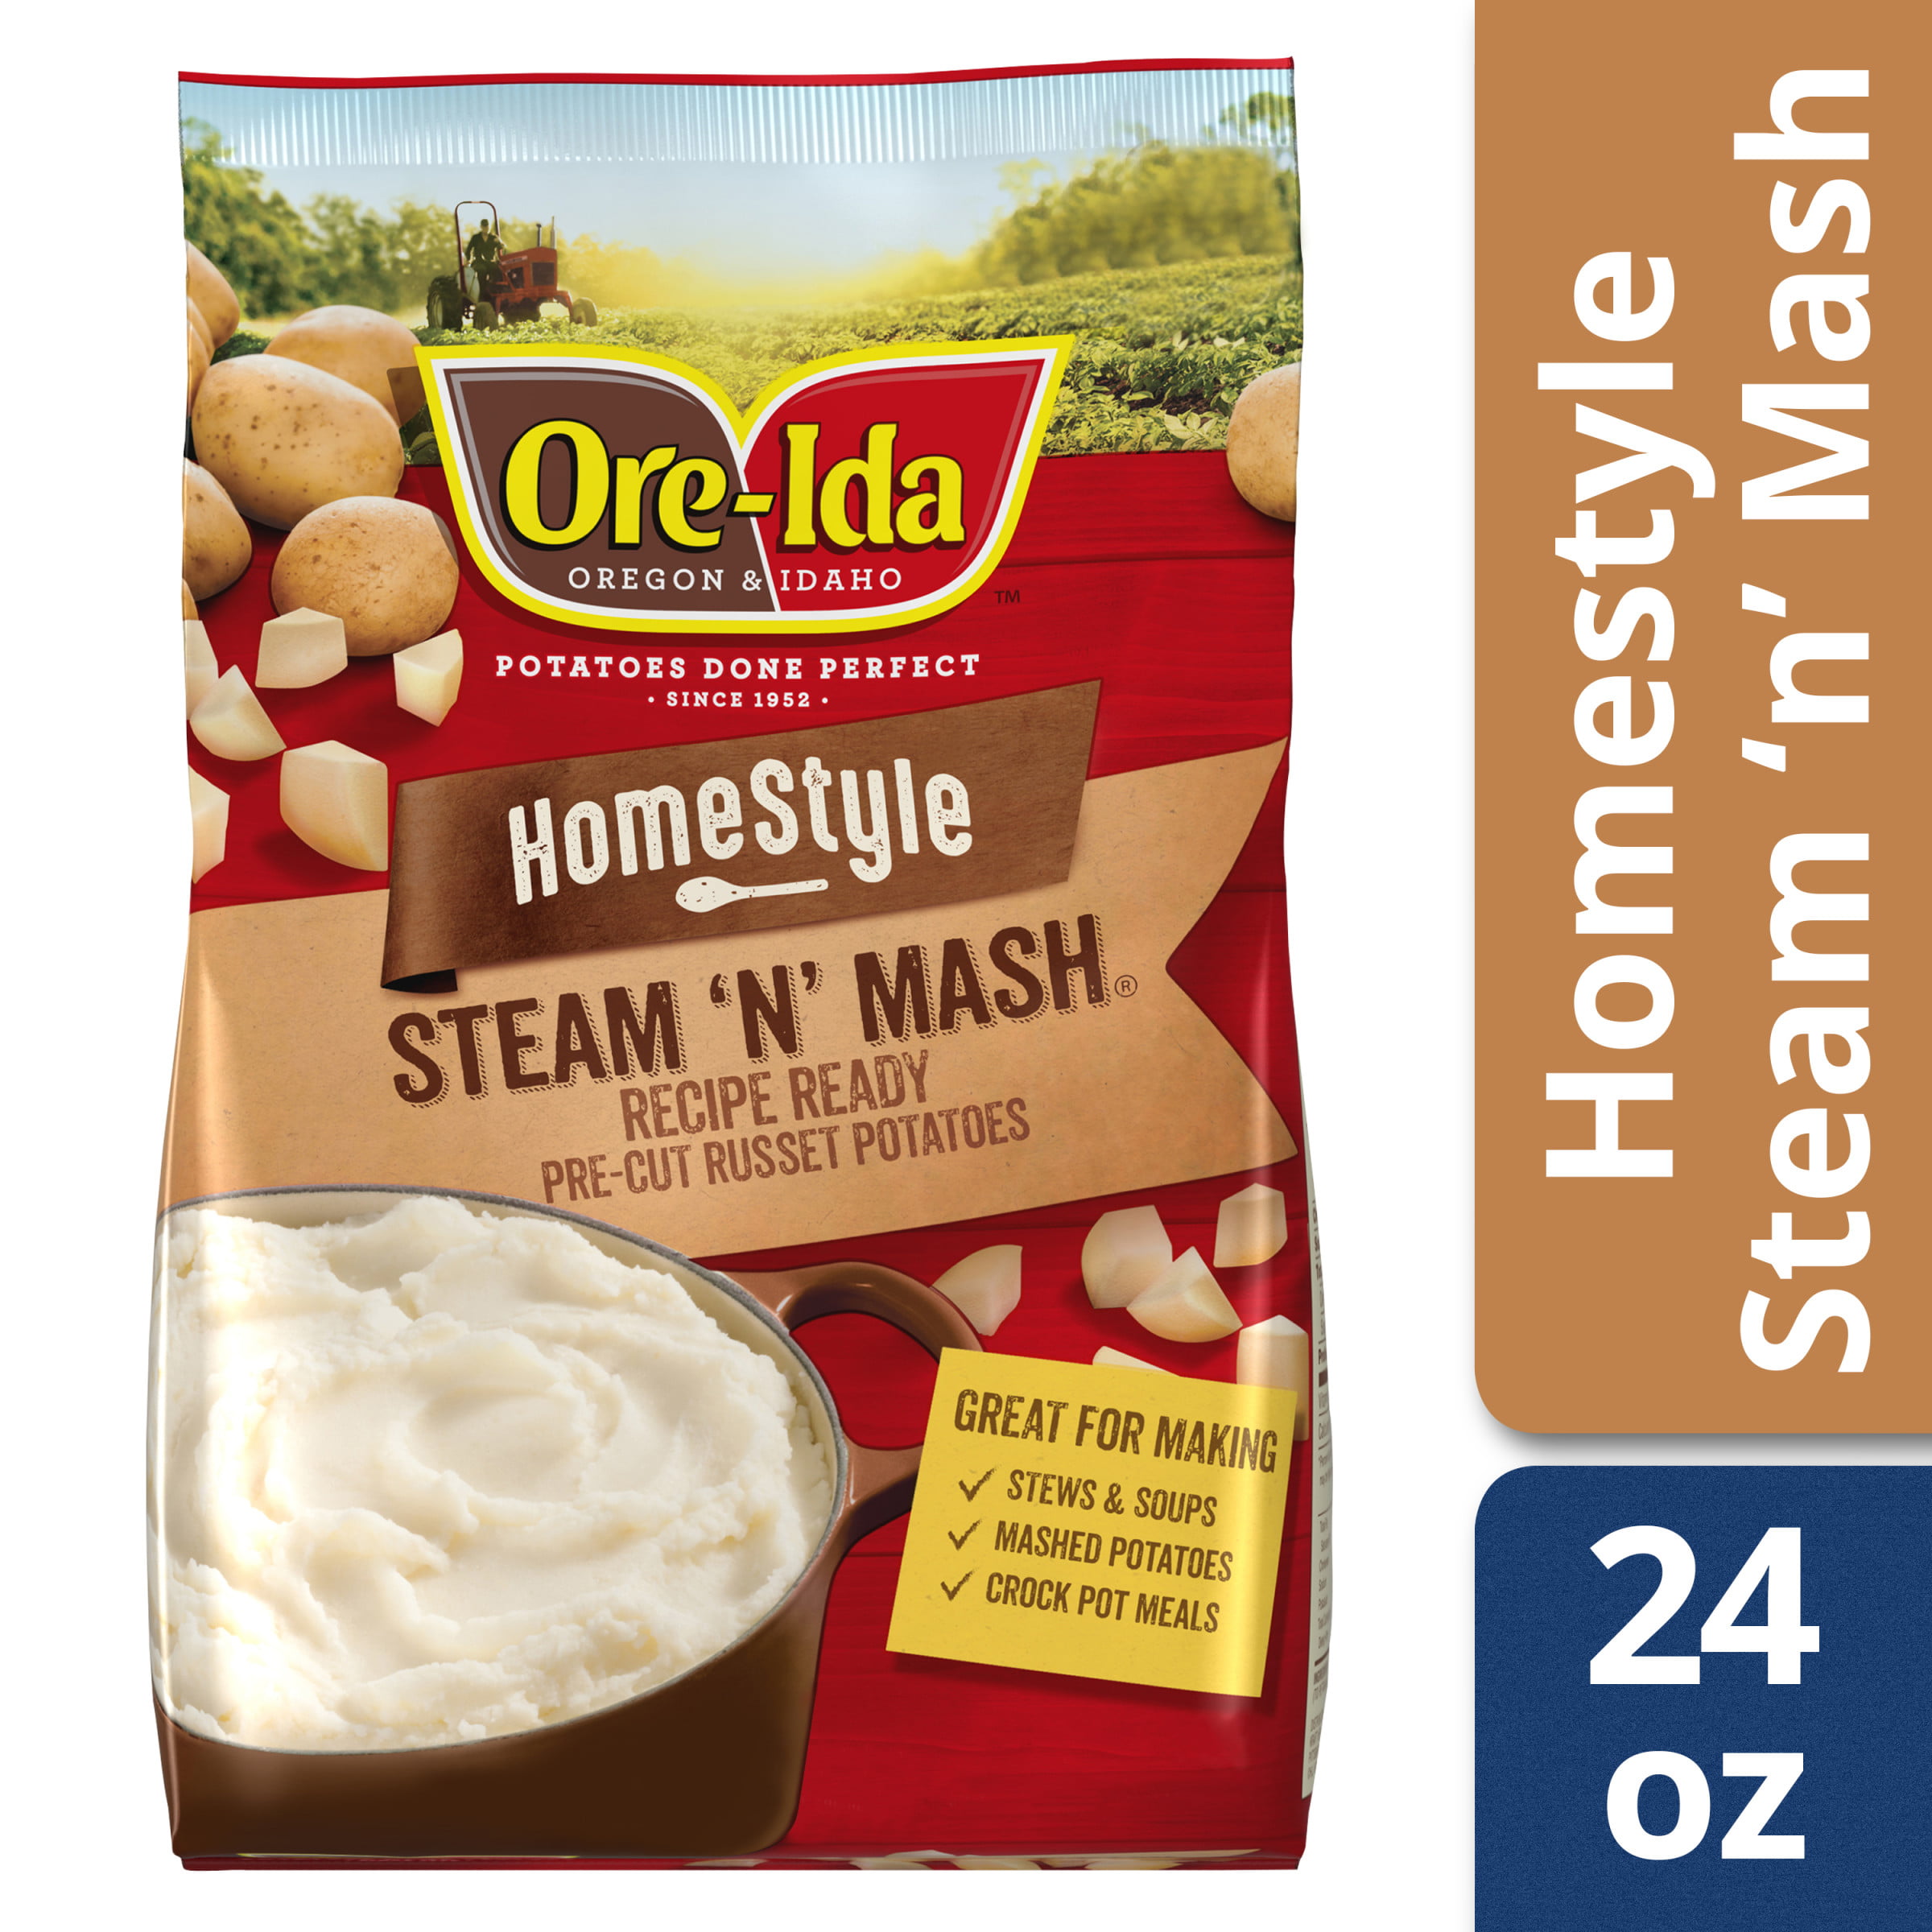 Can you steam potatoes for mashing